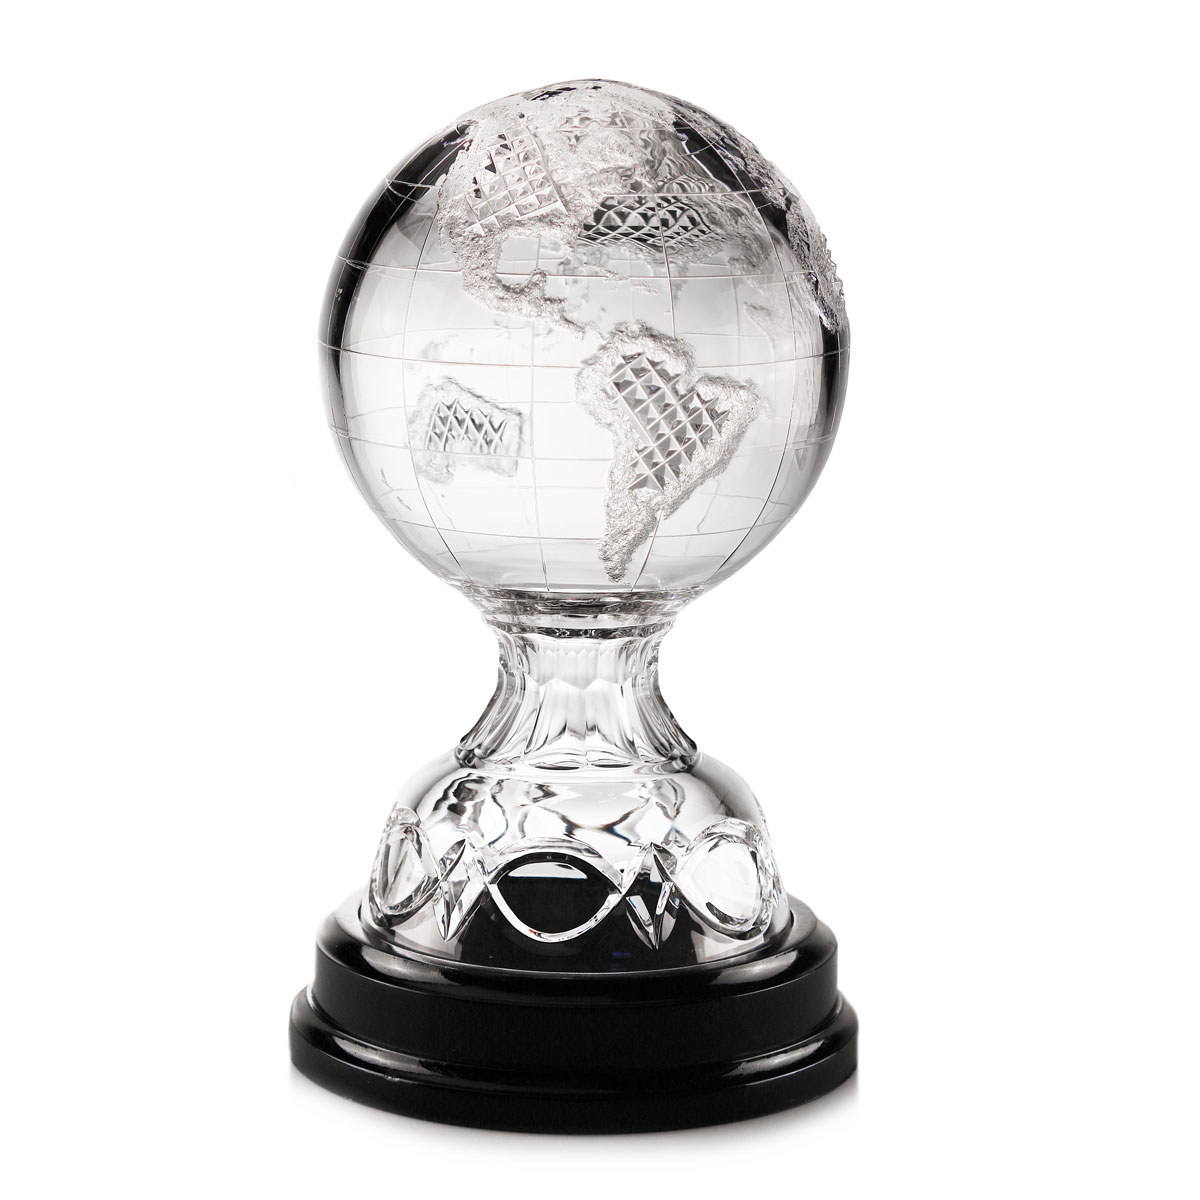 Cashs Ireland, Crystal Art Collection, World Globe With Base, Limited Edition